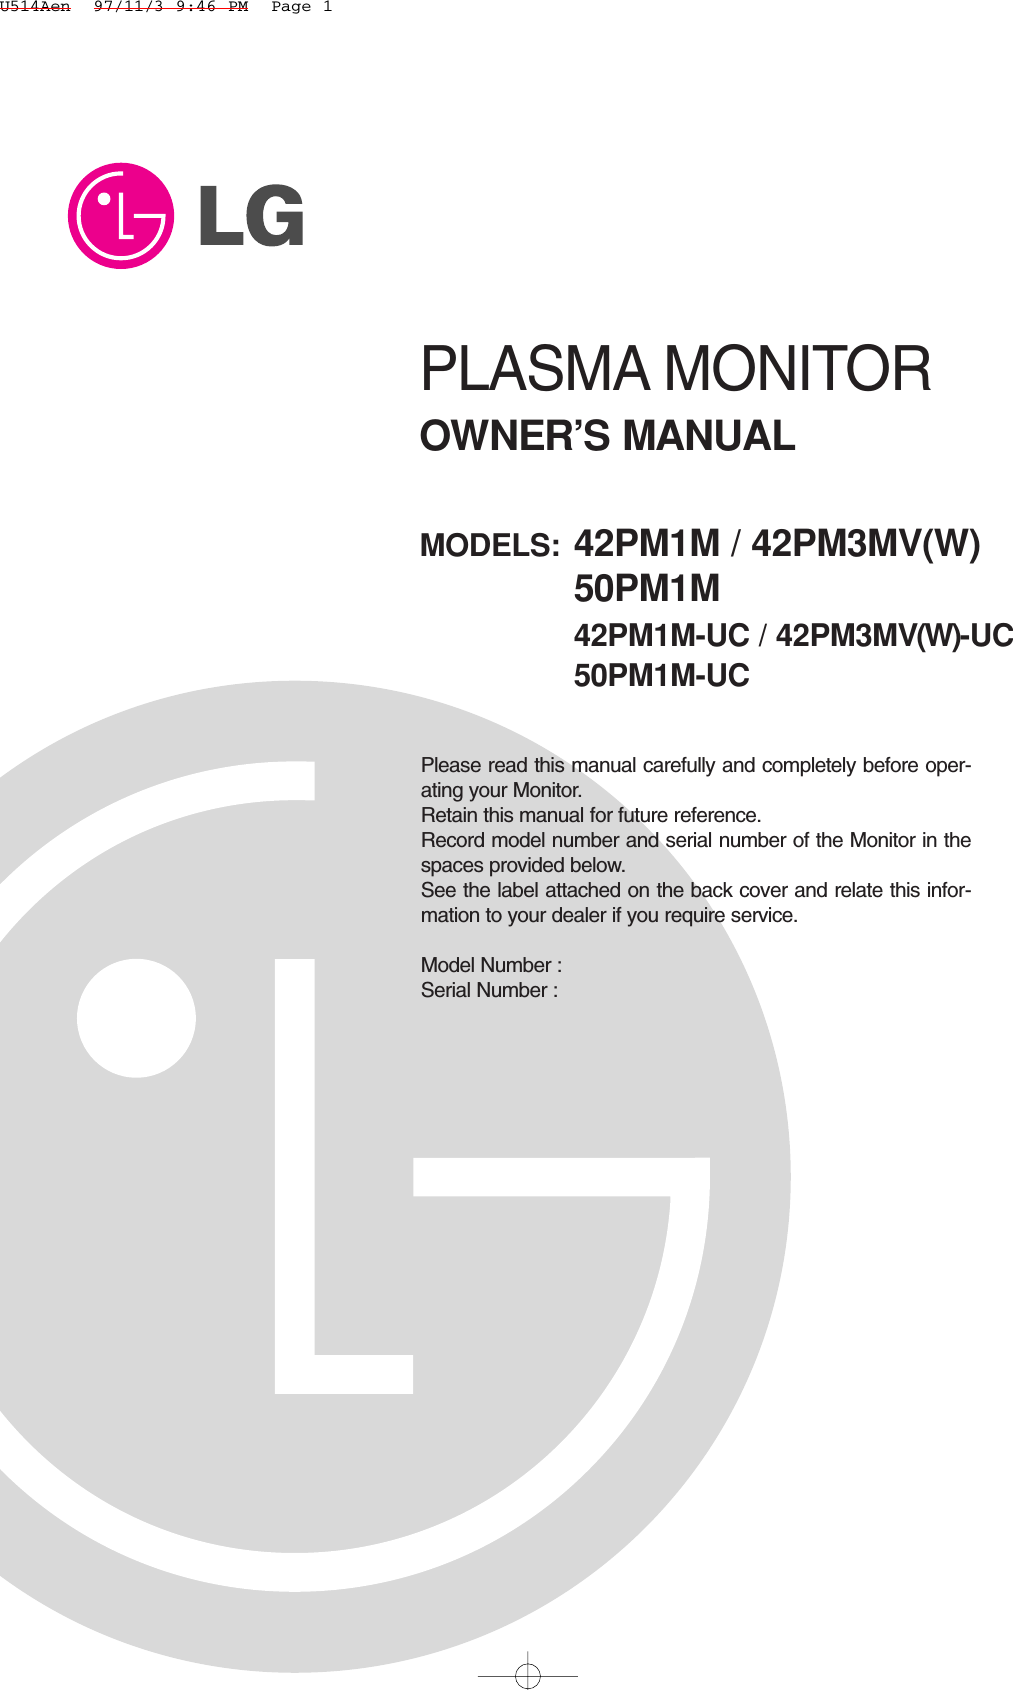 PLASMA MONITOROWNER’S MANUALPlease read this manual carefully and completely before oper-ating your Monitor. Retain this manual for future reference.Record model number and serial number of the Monitor in thespaces provided below. See the label attached on the back cover and relate this infor-mation to your dealer if you require service.Model Number : Serial Number : MODELS: 42PM1M / 42PM3MV(W)50PM1M42PM1M-UC / 42PM3MV(W)-UC50PM1M-UCU514Aen  97/11/3 9:46 PM  Page 1